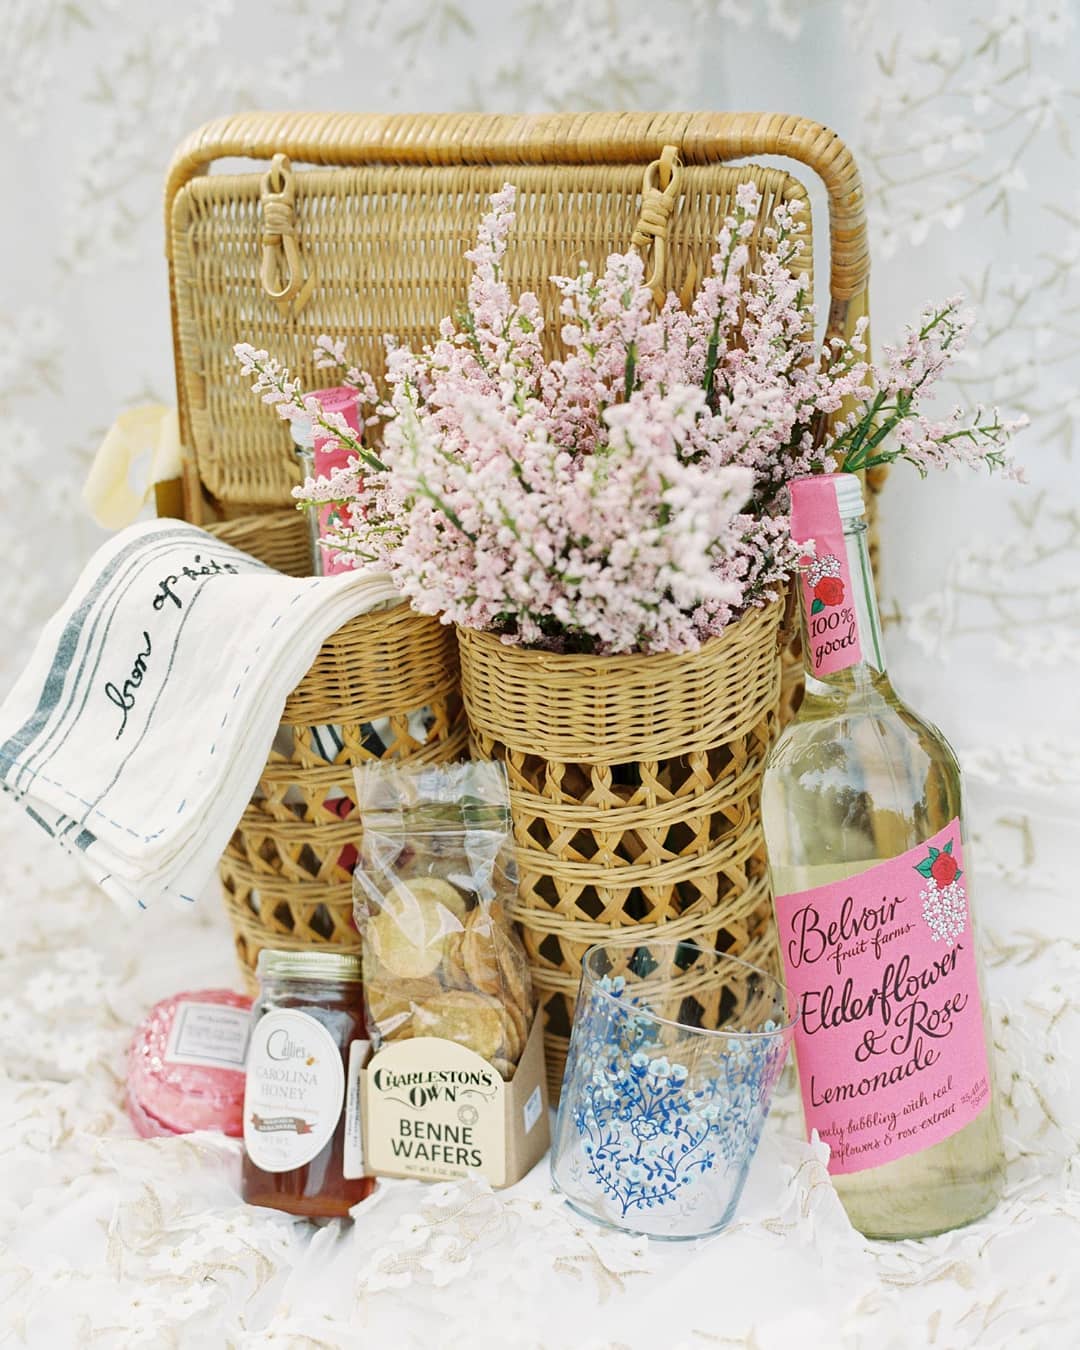 rattan picnic basket with wine bottle holders for unique wedding welcome gift packaging, holding flowers, benne wafers, honey, Belvoir elderflower, linen napkins, handpainted glassware and a peony candle for a destination wedding in Charleston, SC at Middleton Place; photography by The Happy Bloom and planning by Willow and Oak Events